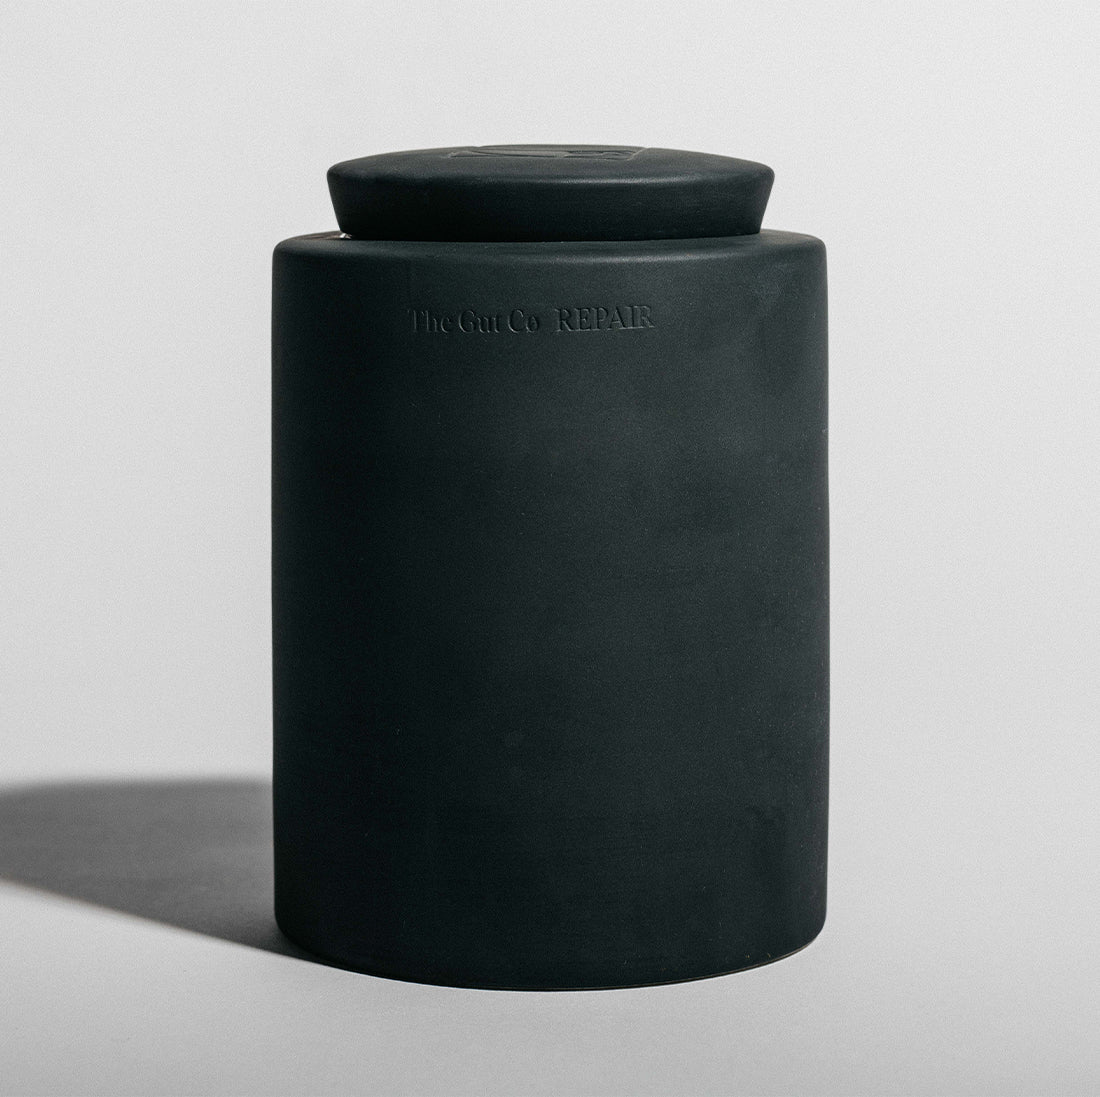 The Facialist - Ceramic Vessel from The Gut  Co